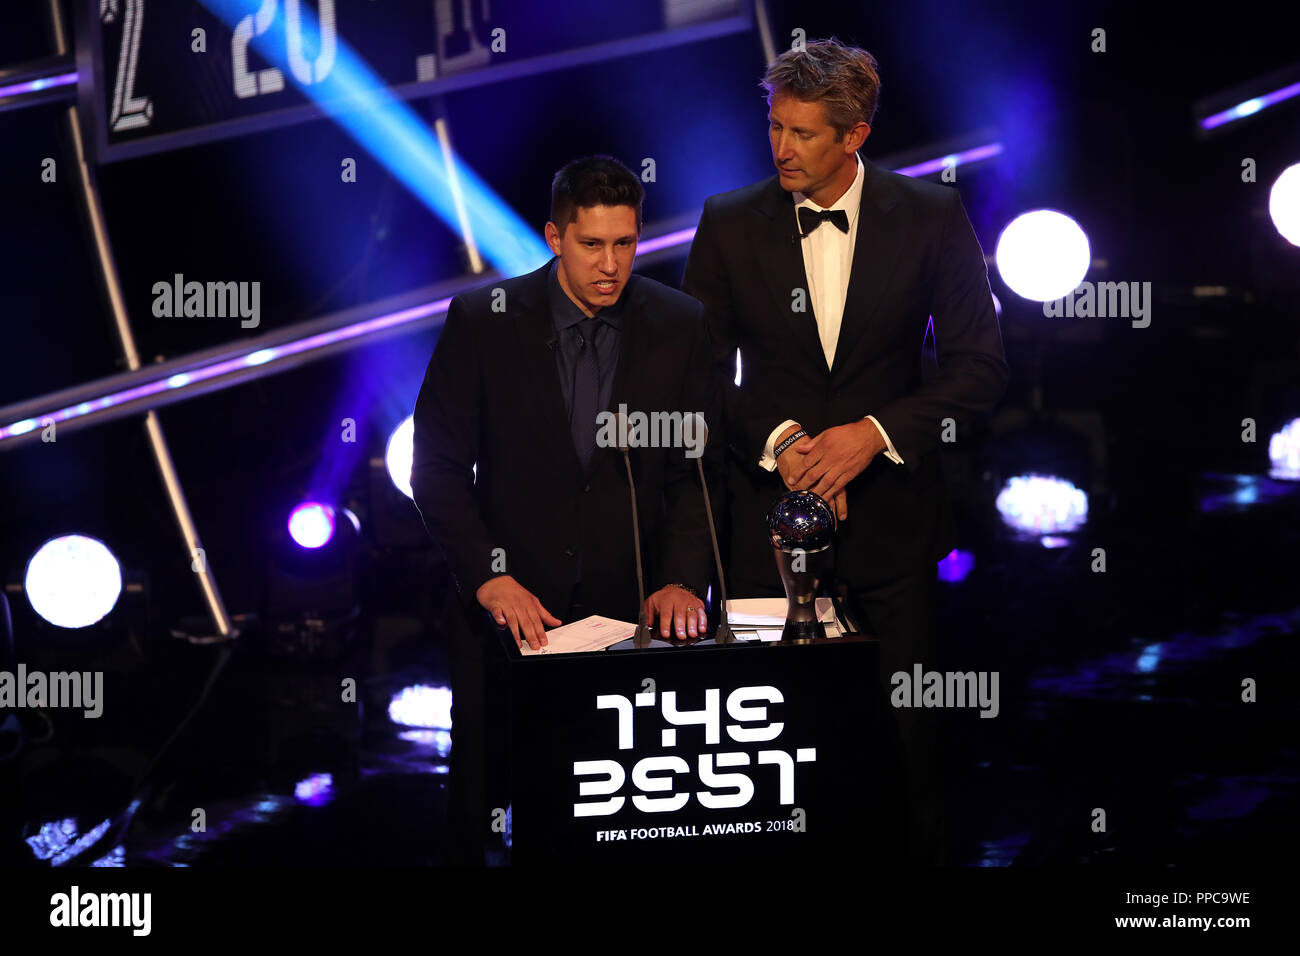 Edwin van der Sar (right) and Chapecoense crash survivor Jackson Follmann present the Best FIFA Goalkeeper Award during the Best FIFA football Awards 2018 at the Royal Festival Hall, London. Picture date: Monday September 24, 2018. See PA story soccer Awards. Photo credit should read: Tim Goode/PA Wire Stock Photo